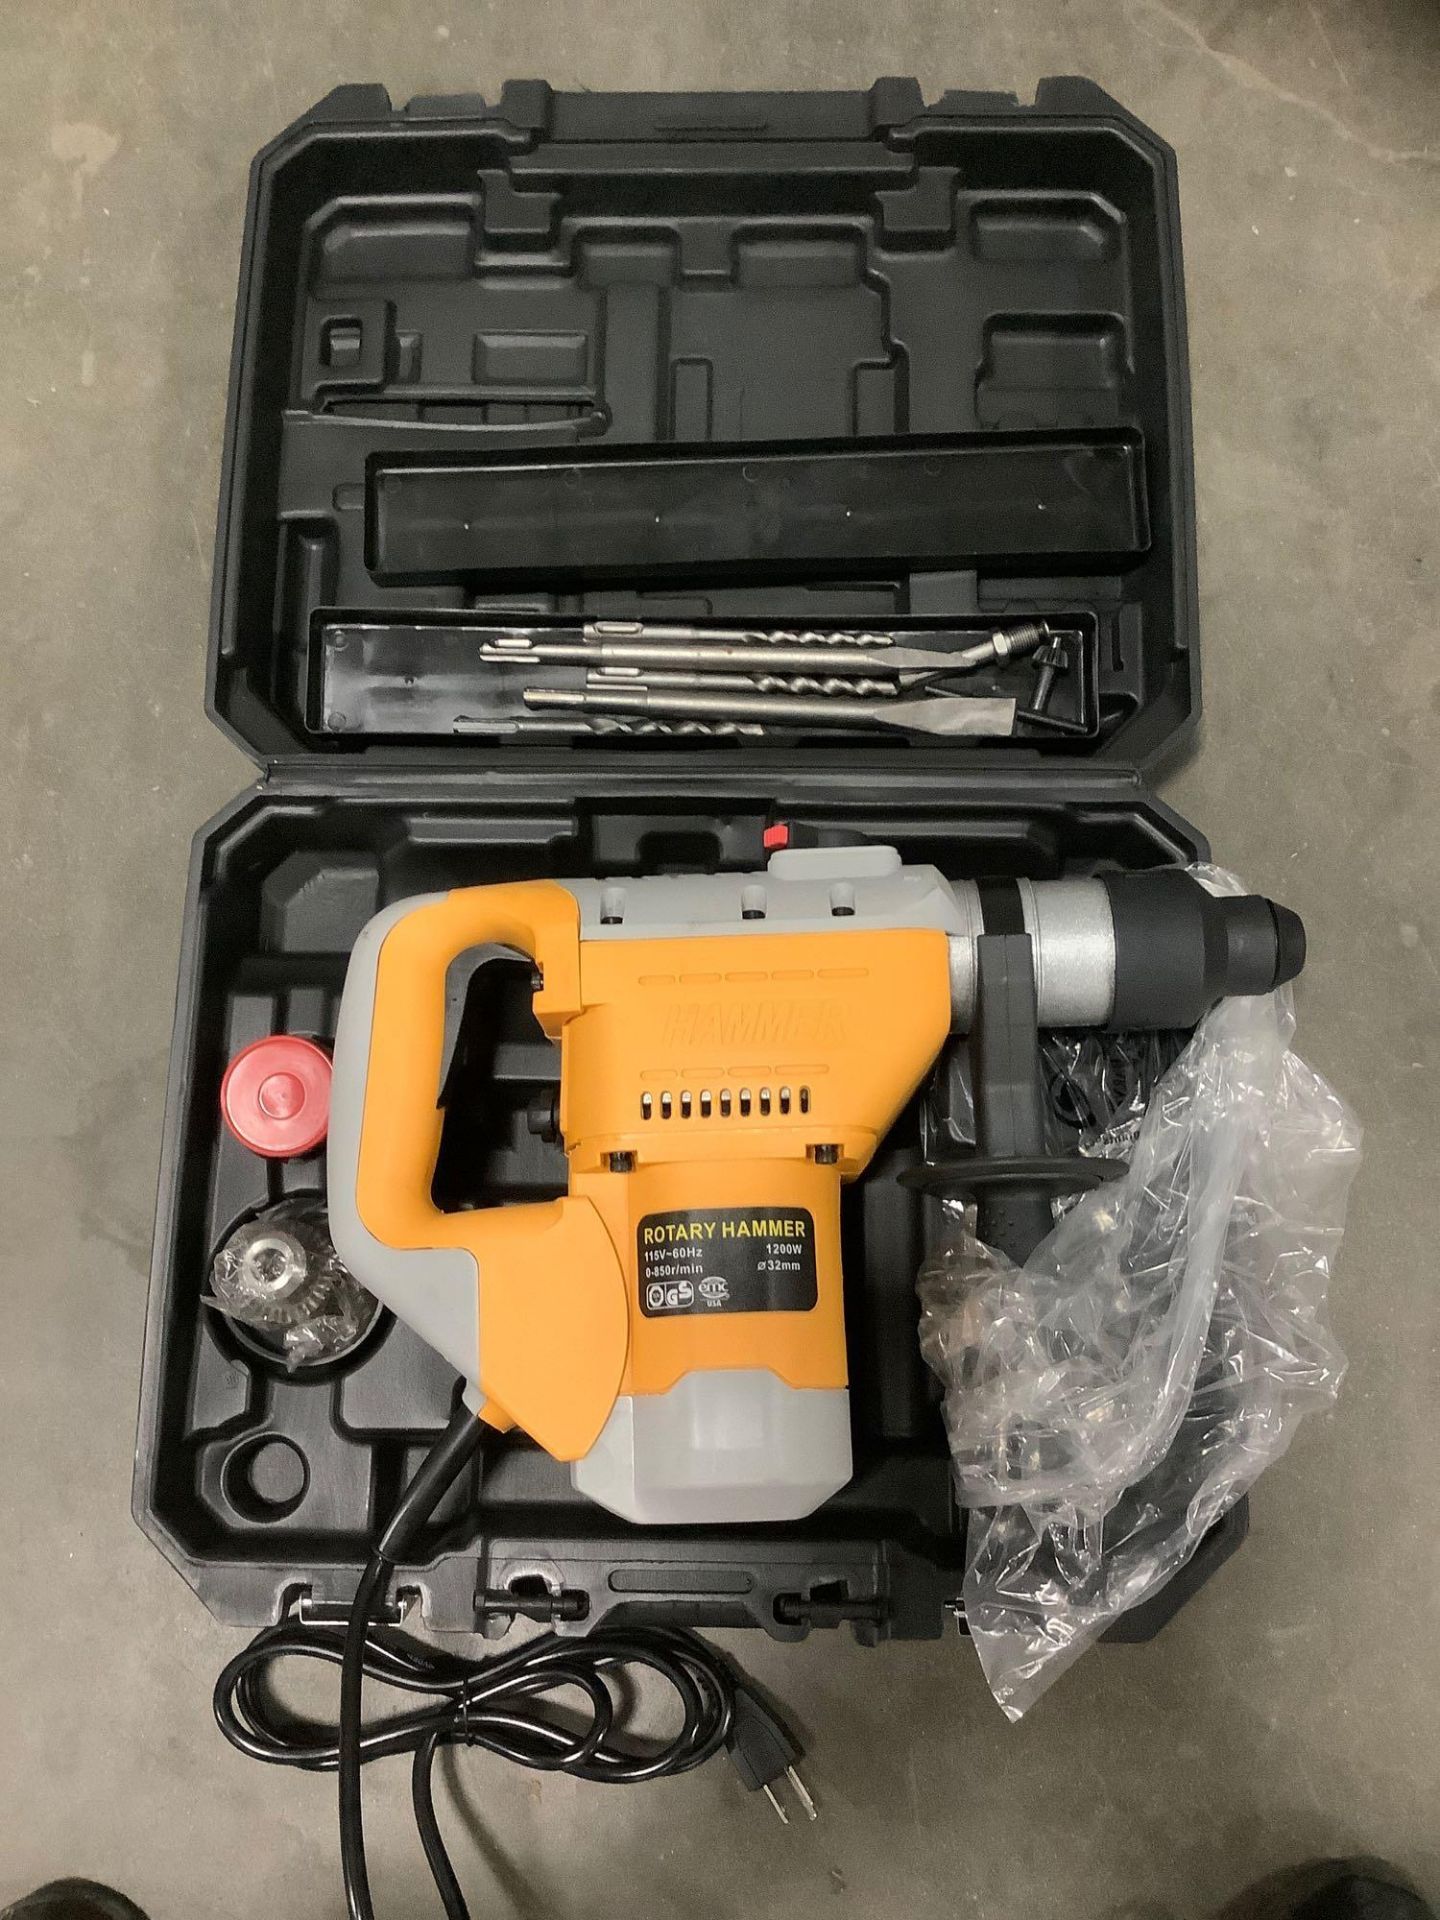 HUSKIE 11218 CORDED ROTARY HAMMER 32MM, WITH HANDLE, ASST DRILL BITS, GREASE FOR DRILL BITS, AND CHU - Image 2 of 5